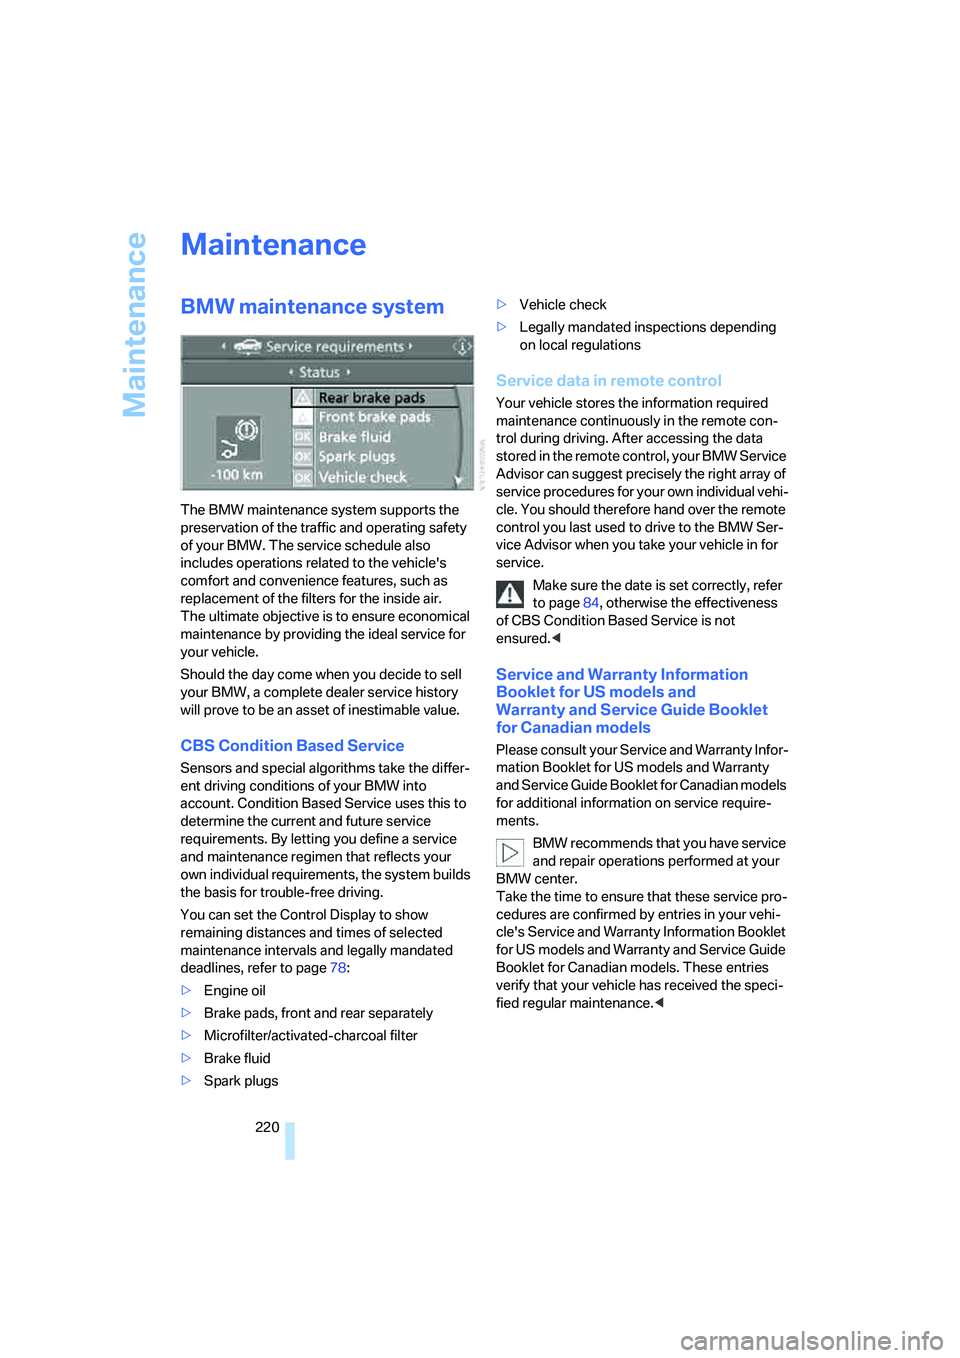 BMW 525I 2007  Owners Manual Maintenance
220
Maintenance
BMW maintenance system
The BMW maintenance system supports the 
preservation of the traffic and operating safety 
of your BMW. The service schedule also 
includes operation